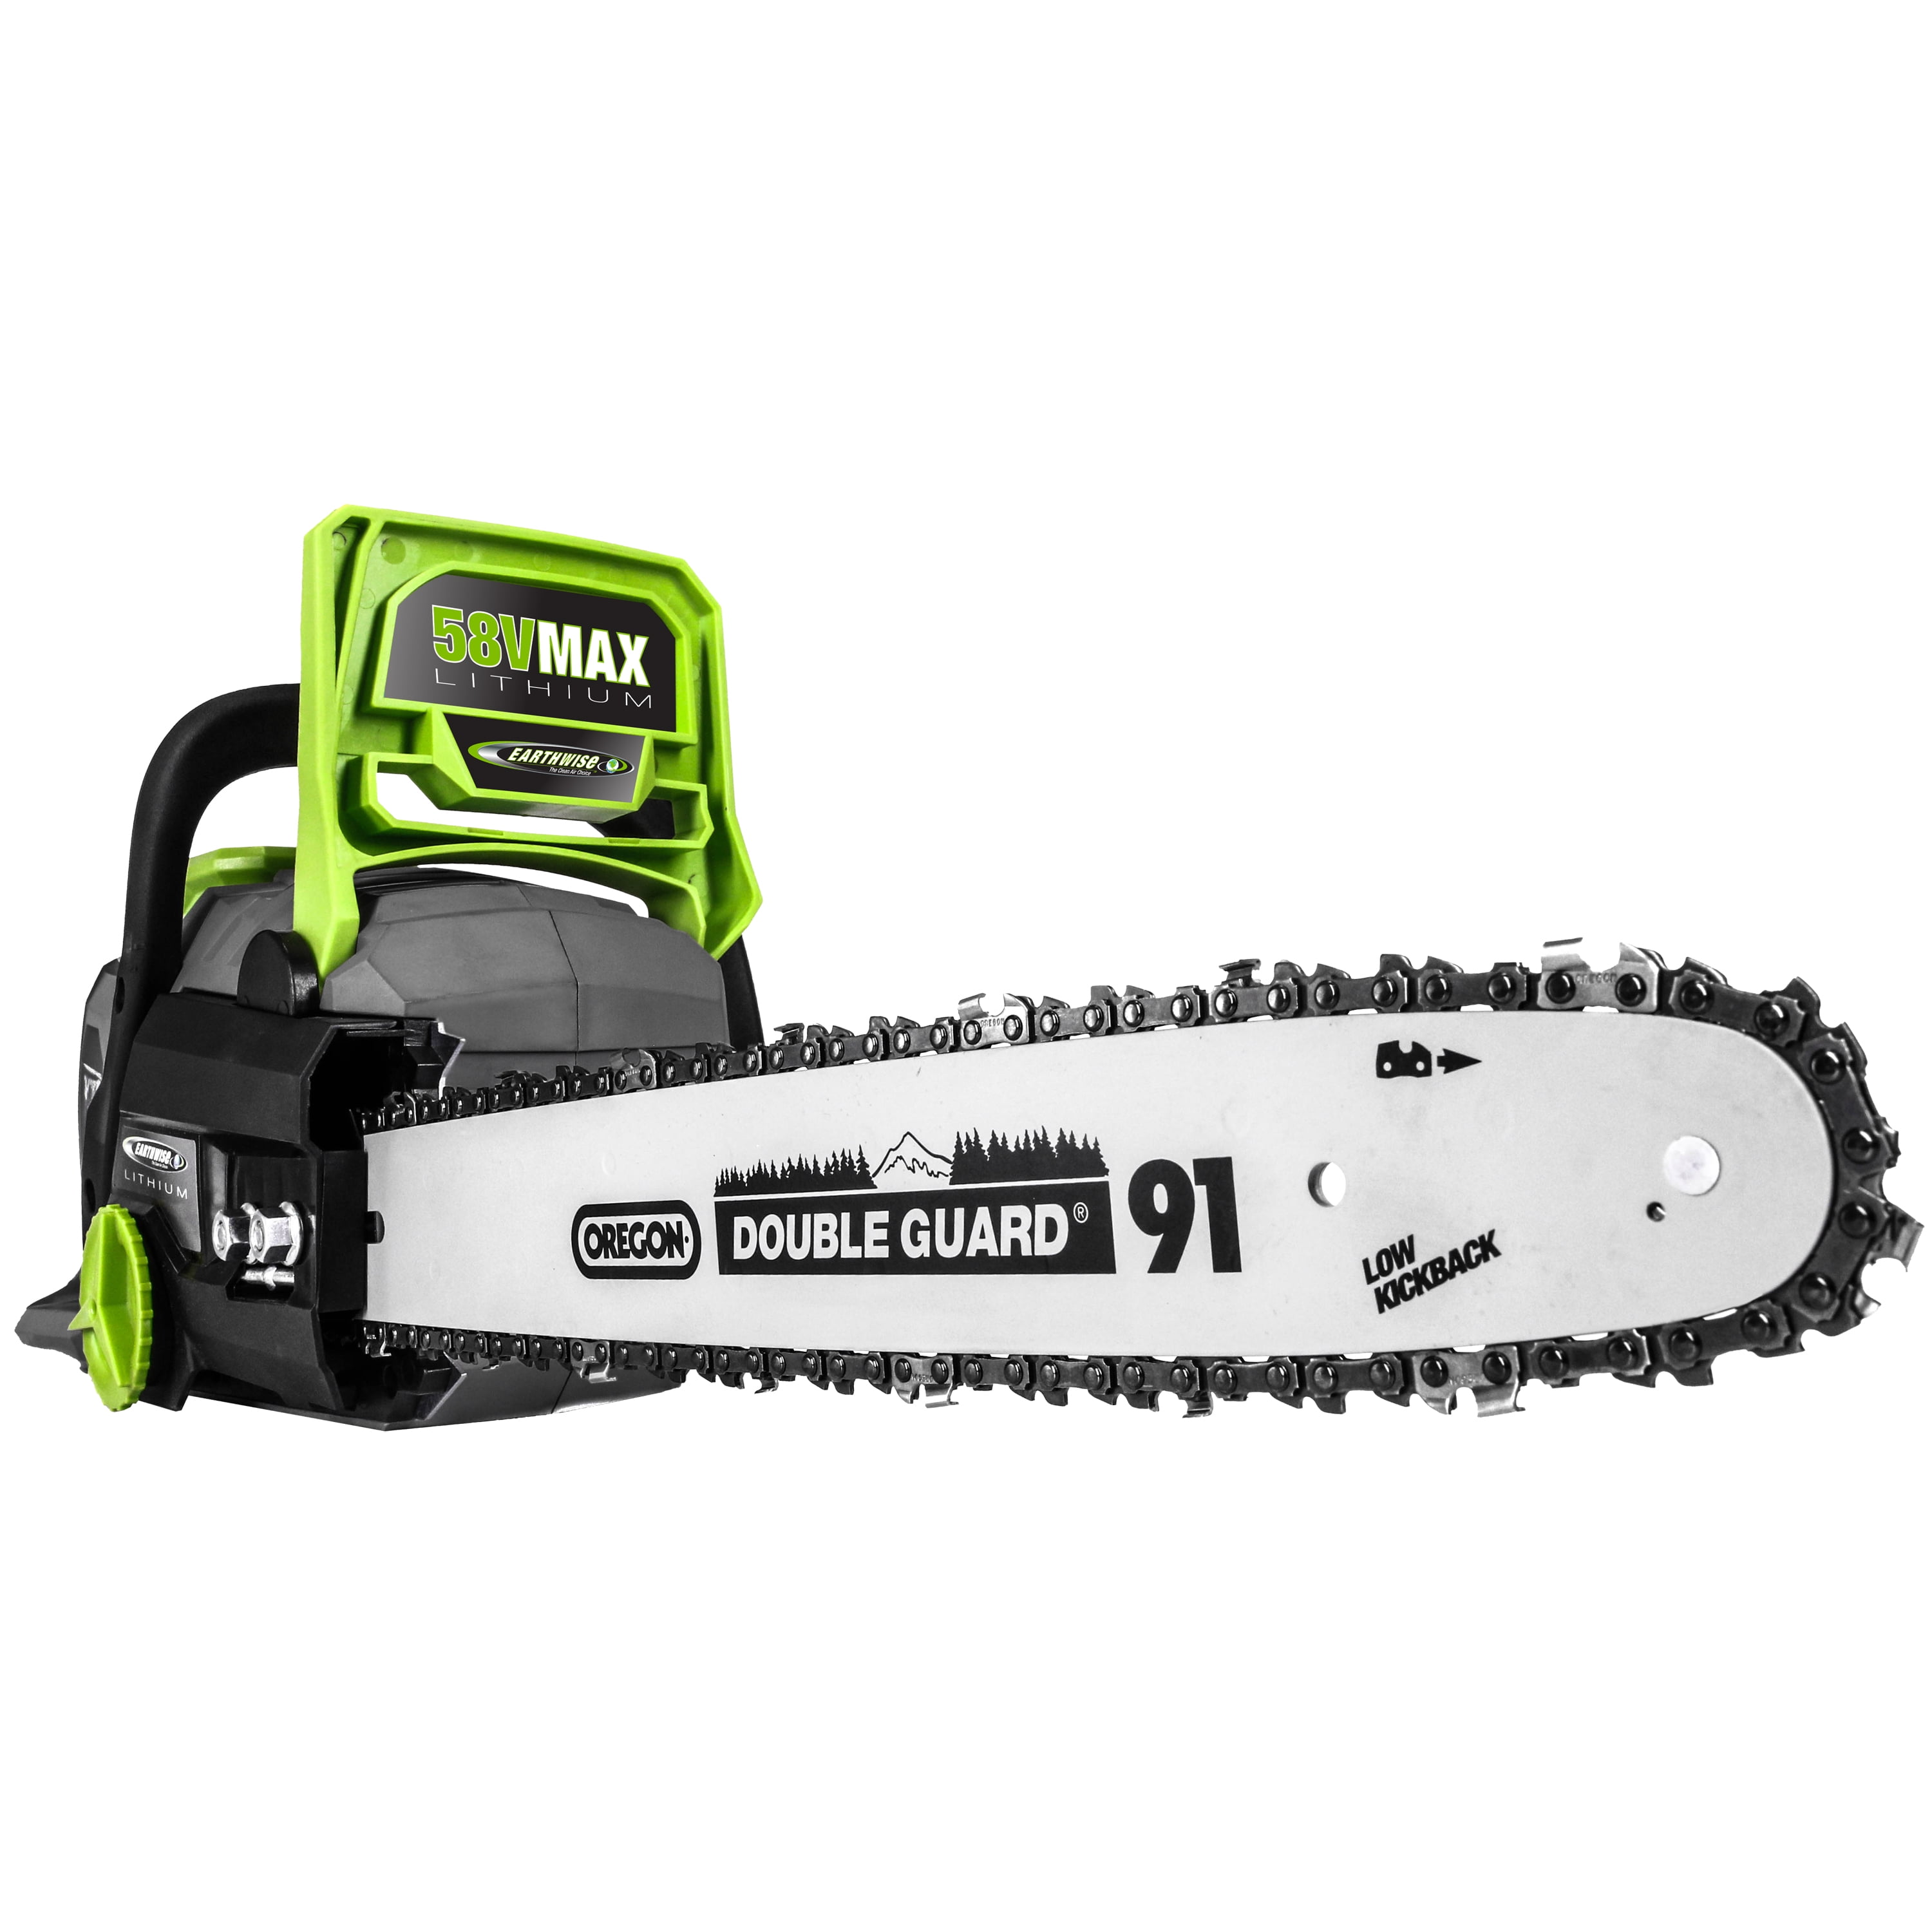 Green Earthwise LCS34014 40V Cordless Electric Chainsaw 2Ah Battery & Charger Included 14